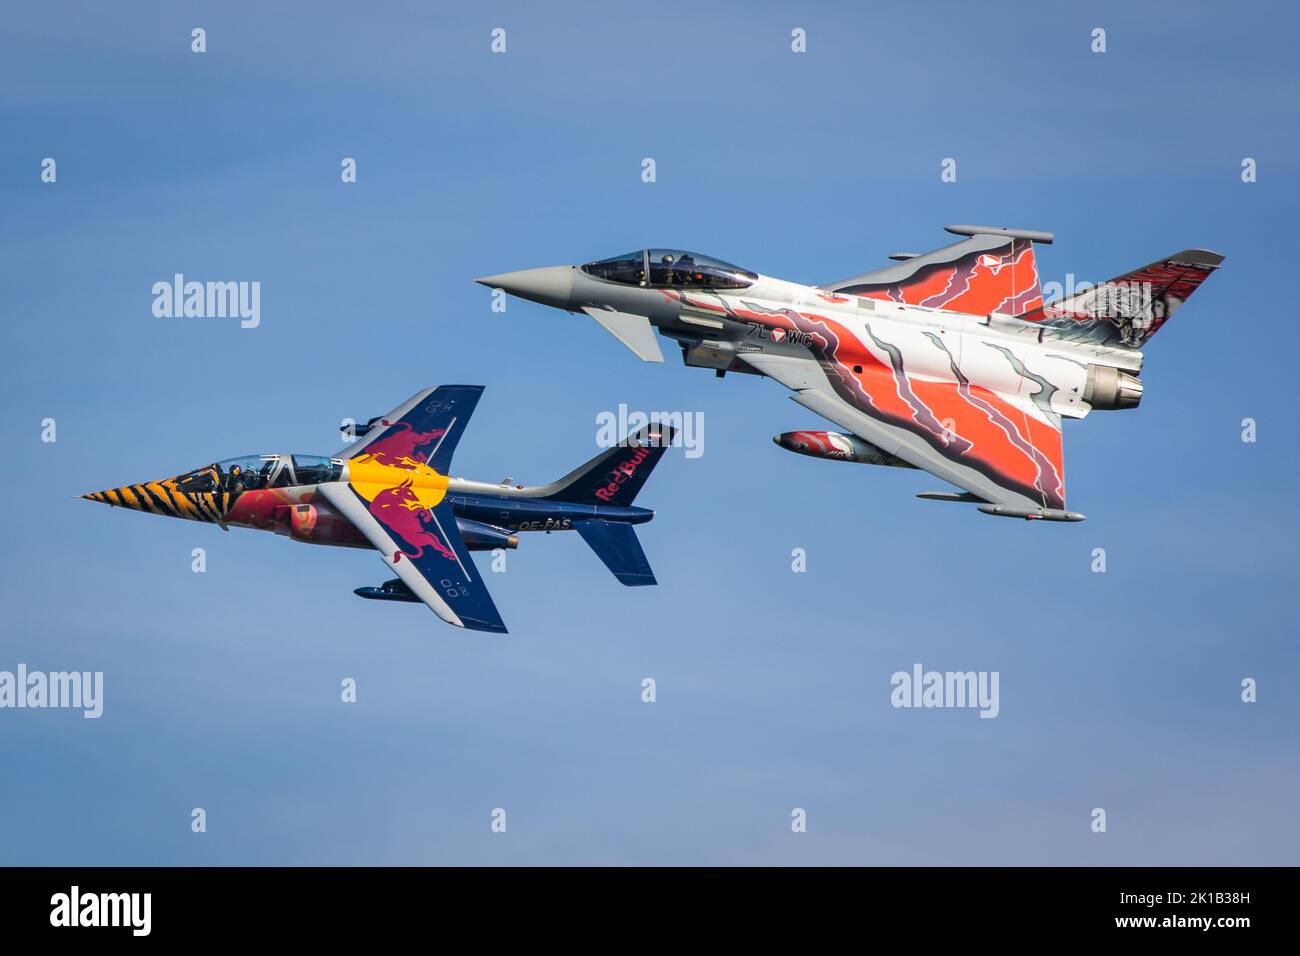 A Red Bull Alpha Jet and a Bundesheer Eurofighter Typhoon in special Tiger colors on a formation flight with blue sky Stock Photo